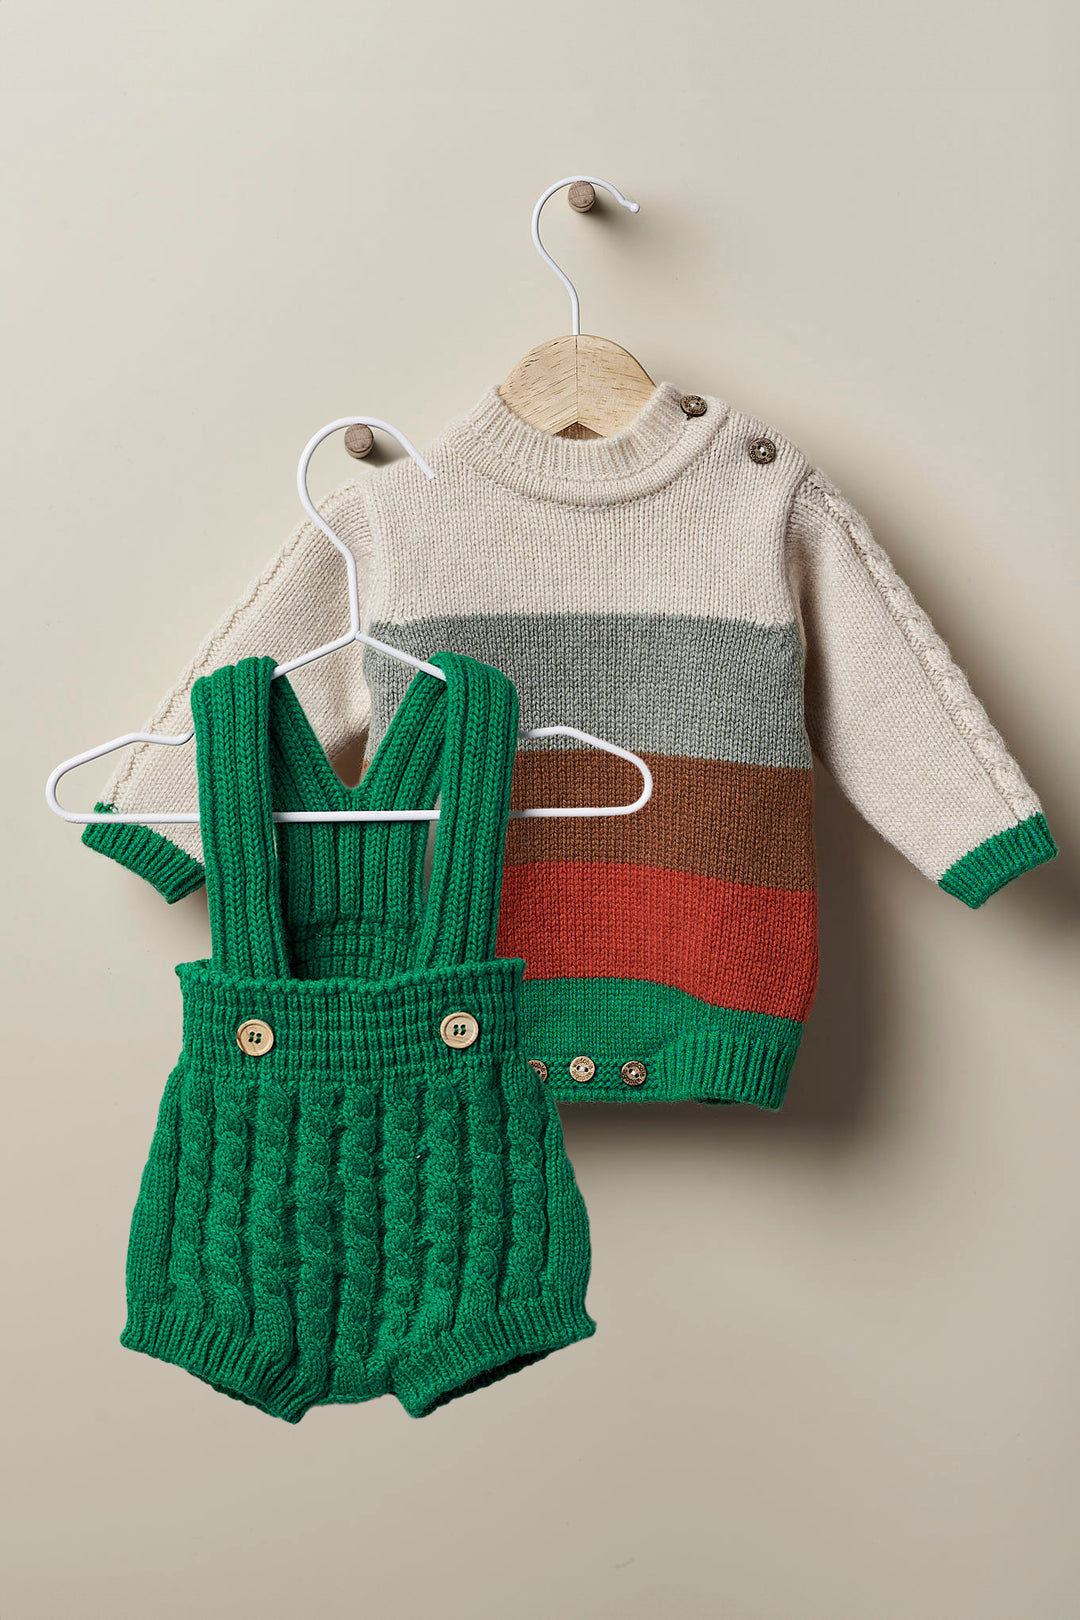 Wedoble "Pedro" Beige & Green Stripe Cashmere Knit Outfit | Millie and John